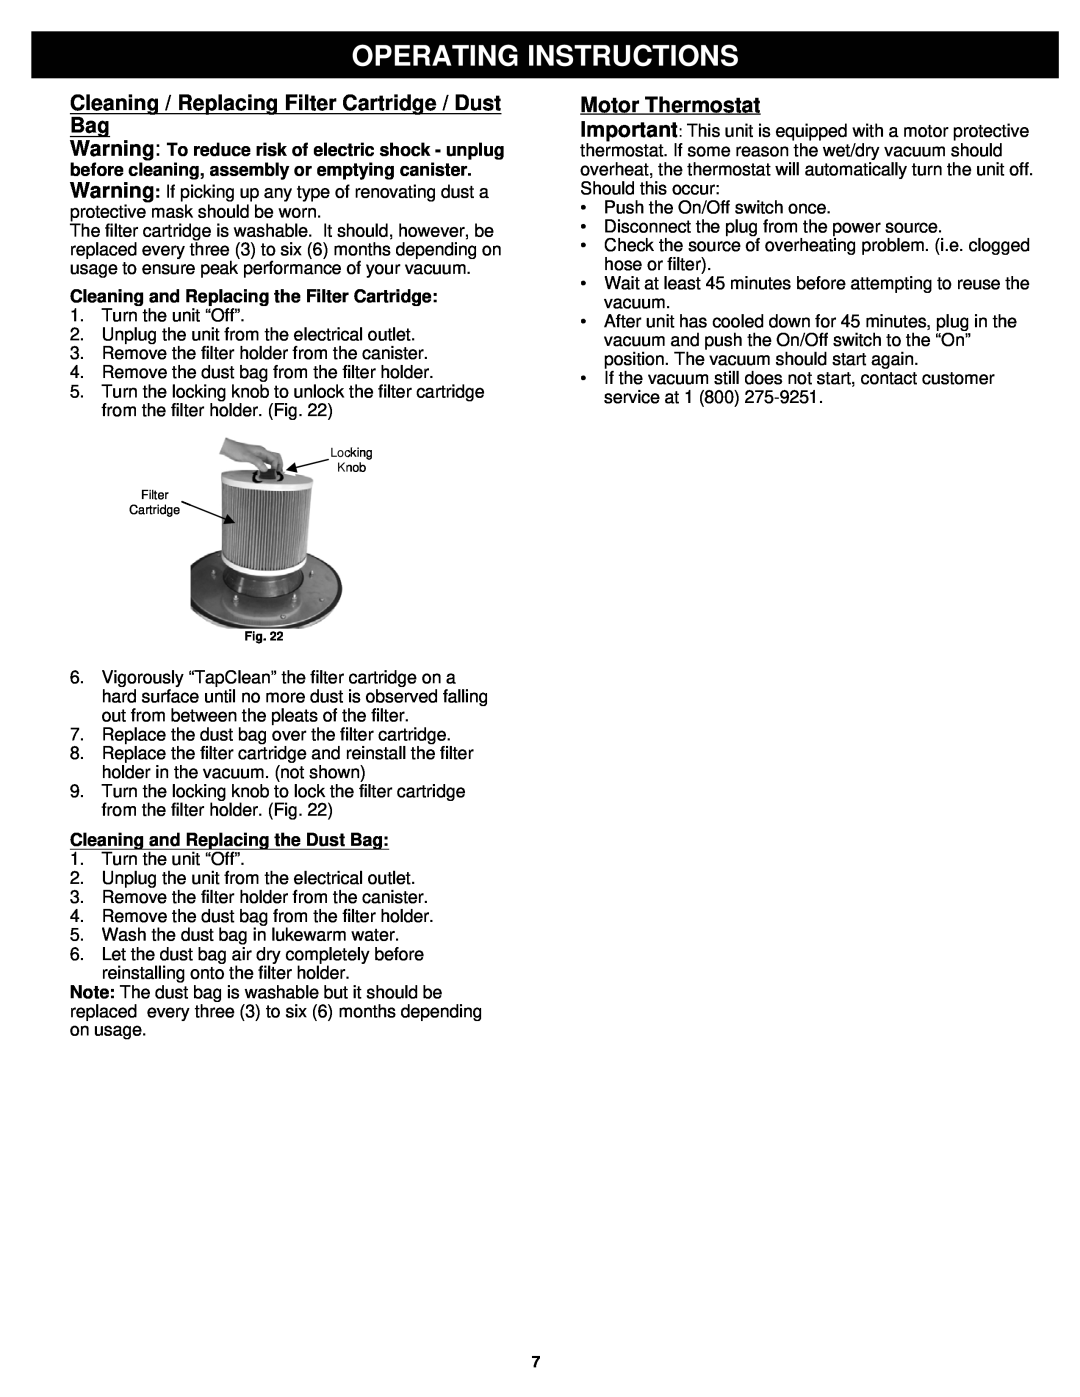 Fantom Vacuum CW233H Operating Instructions, Cleaning / Replacing Filter Cartridge / Dust Bag, Motor Thermostat 